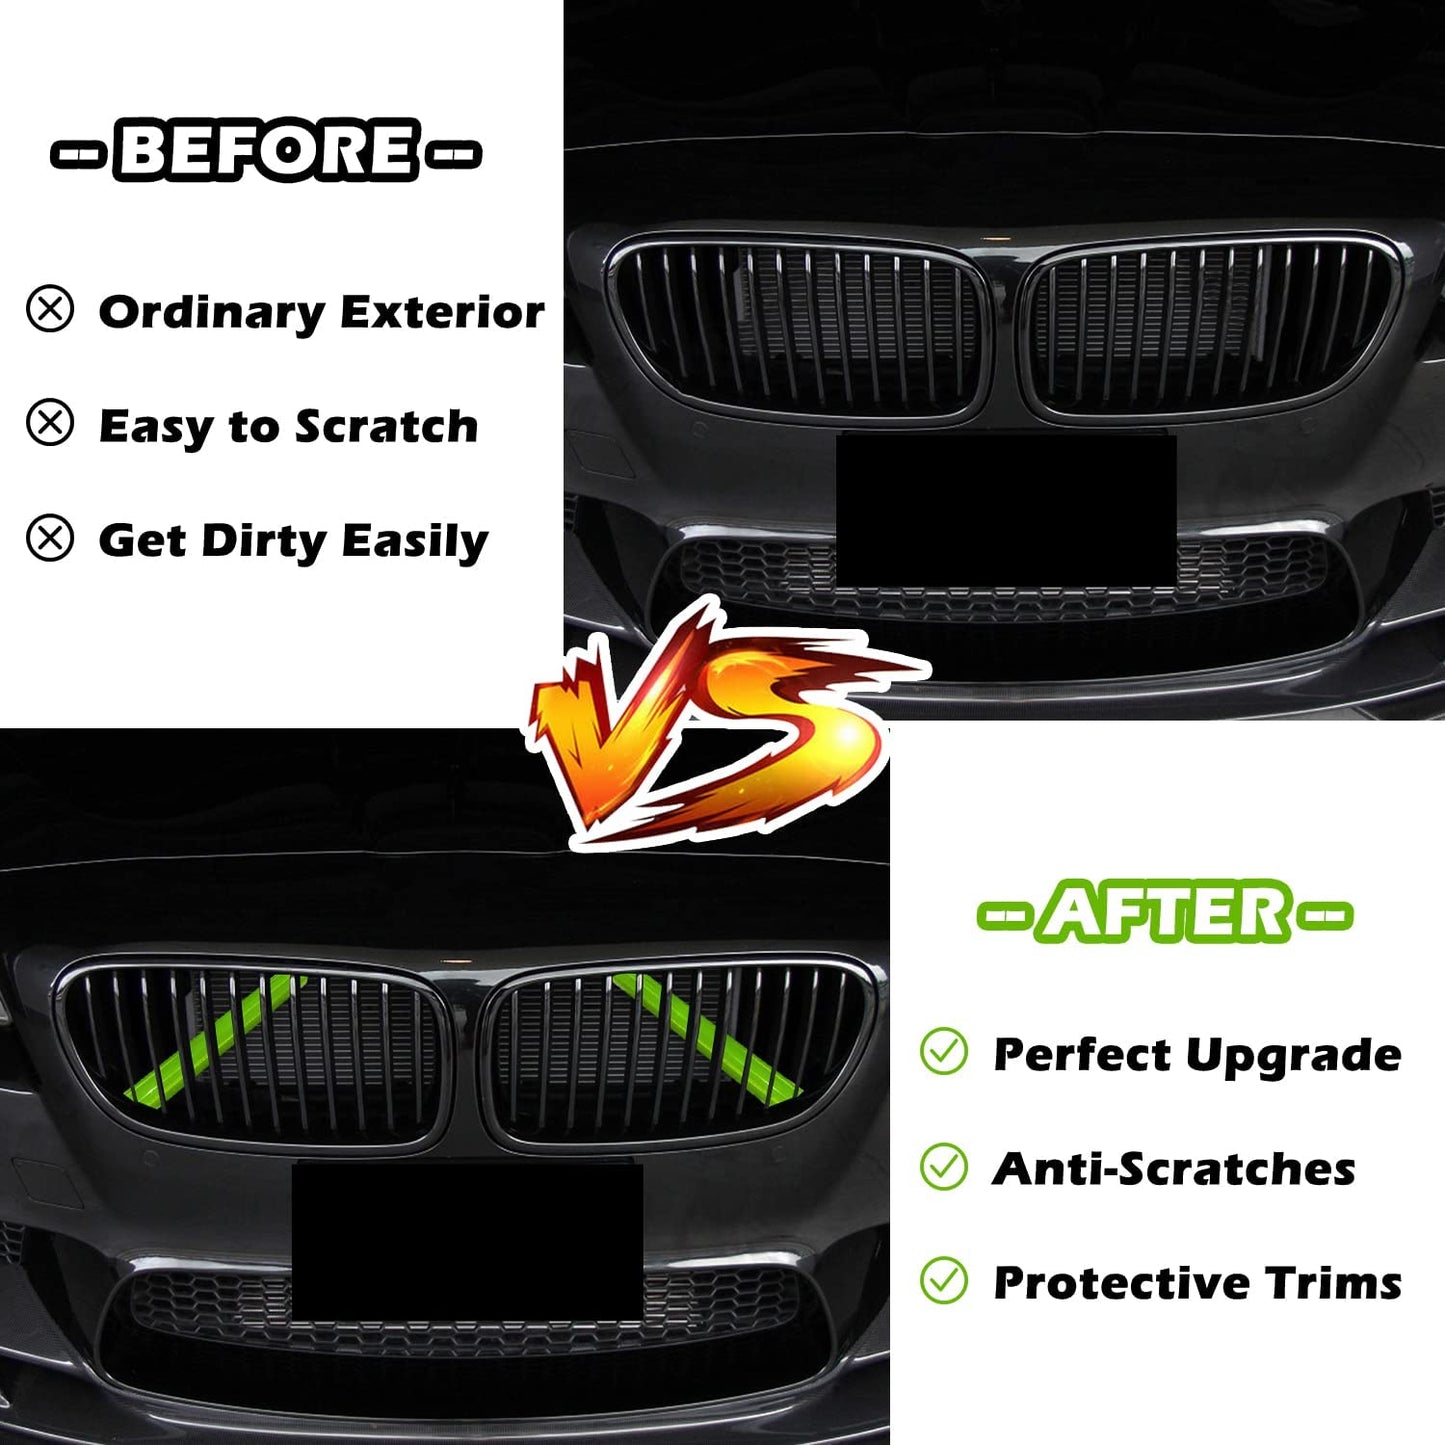 BMW green inner grill rod covers